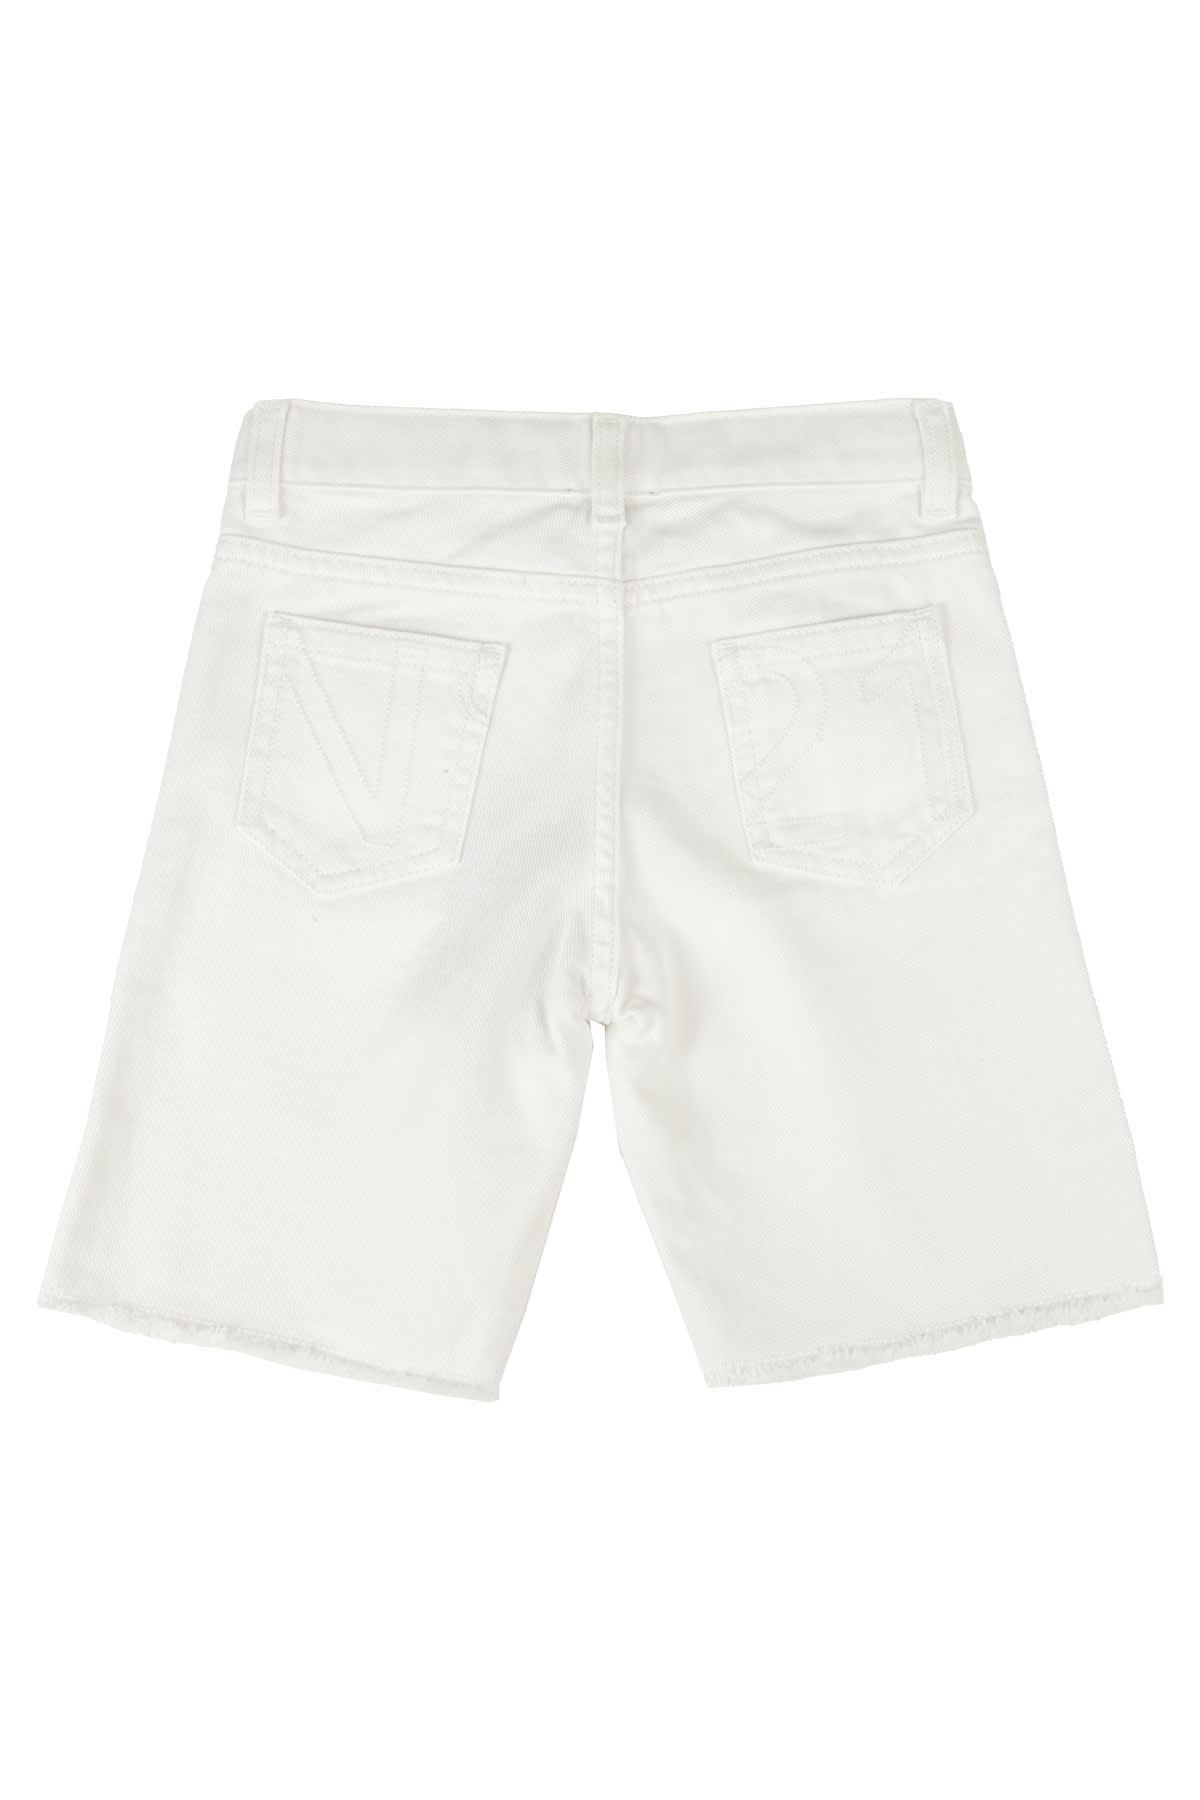 Shop N°21 Shorts In Natural White